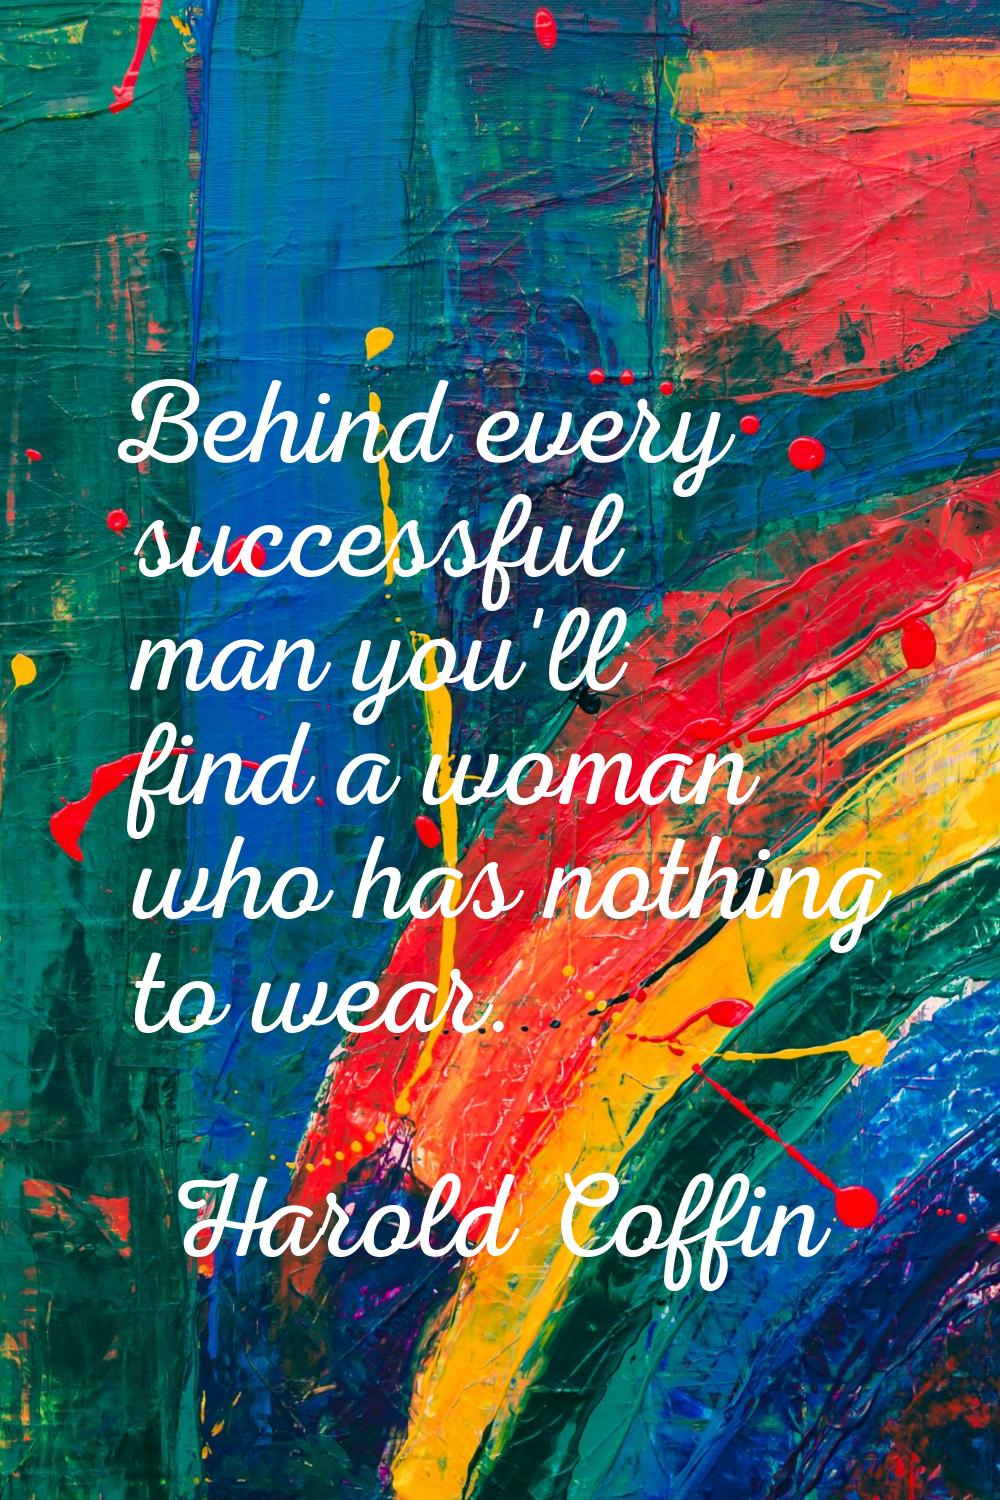 Behind every successful man you'll find a woman who has nothing to wear.